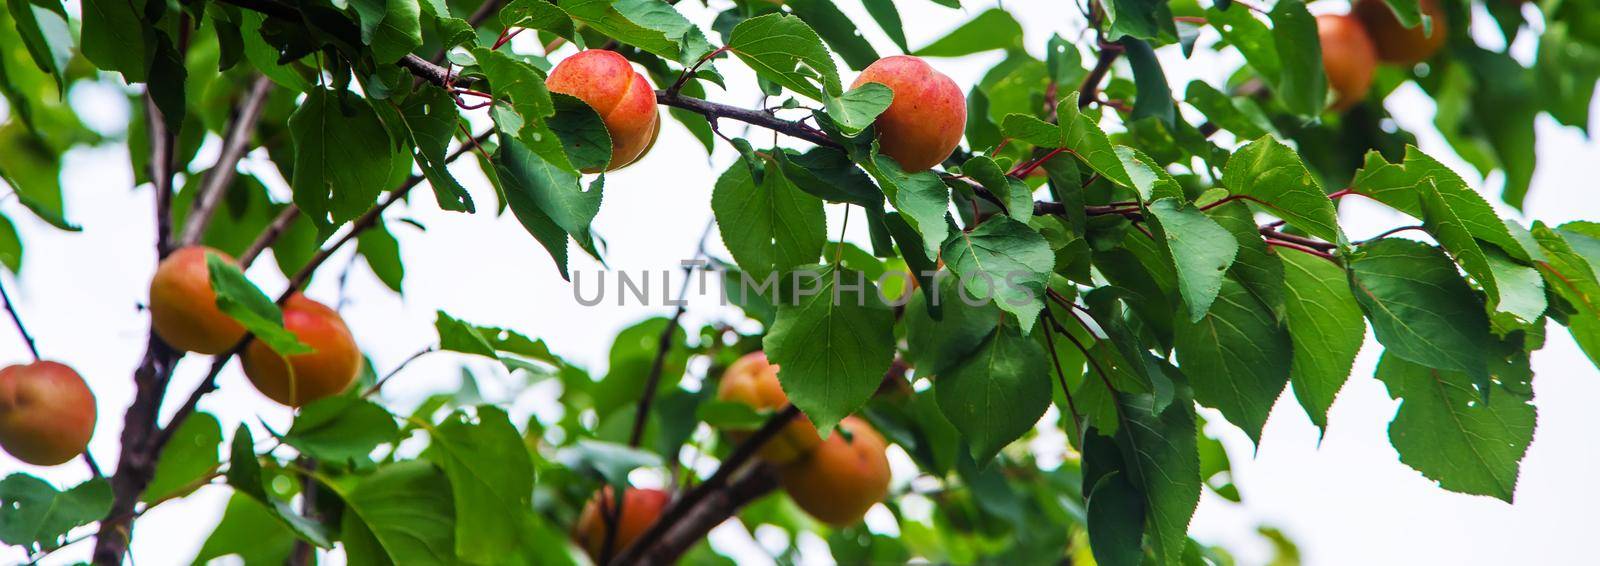 apricot on a tree in the garden. Selective focus.nature